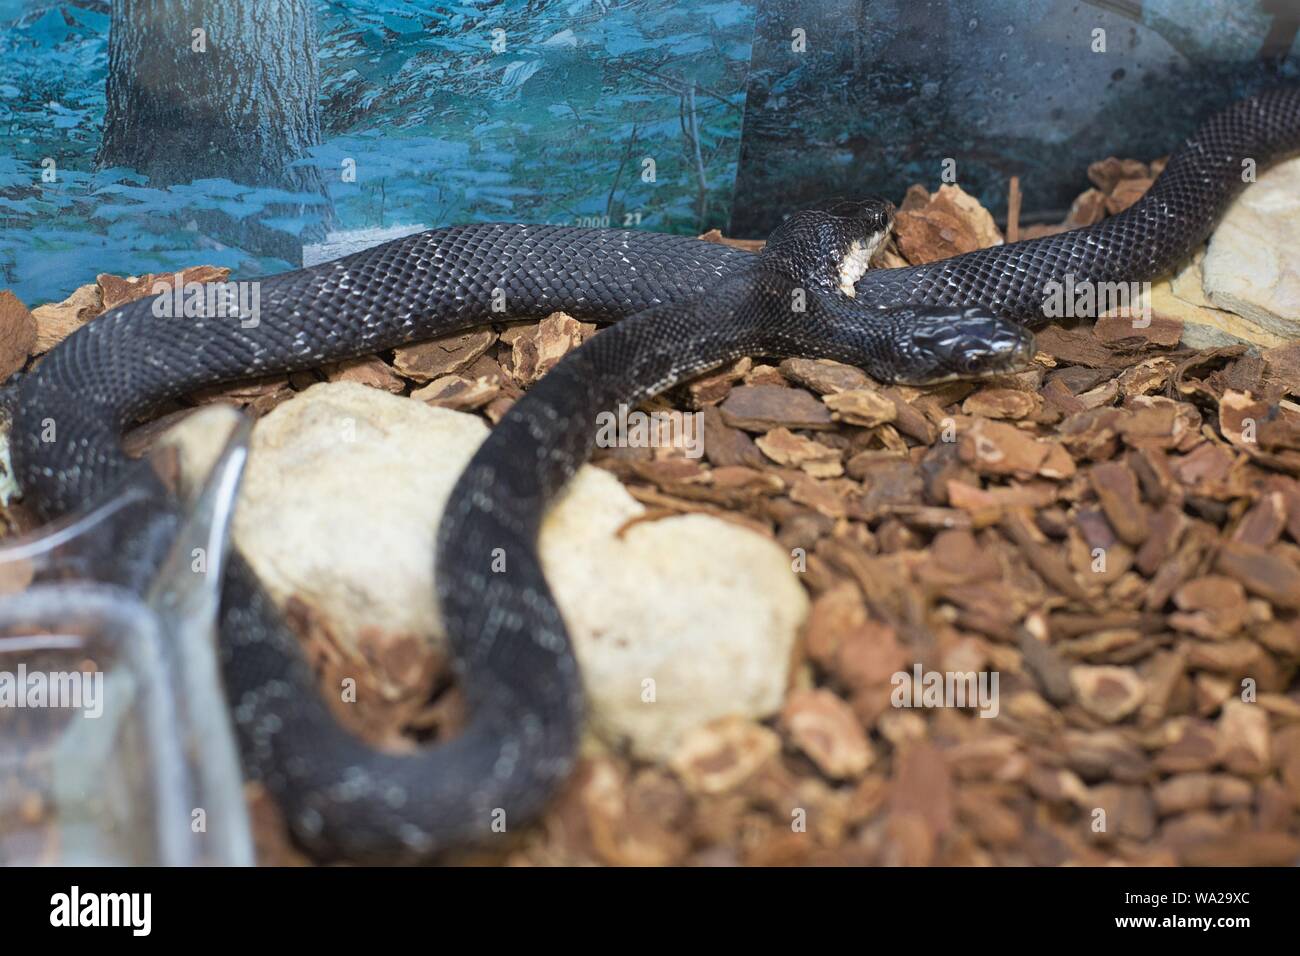 A live two-headed Western Rat Snake on display at Shepherd of the Hills Fish Hatchery in Branson, Missouri, USA. Stock Photo